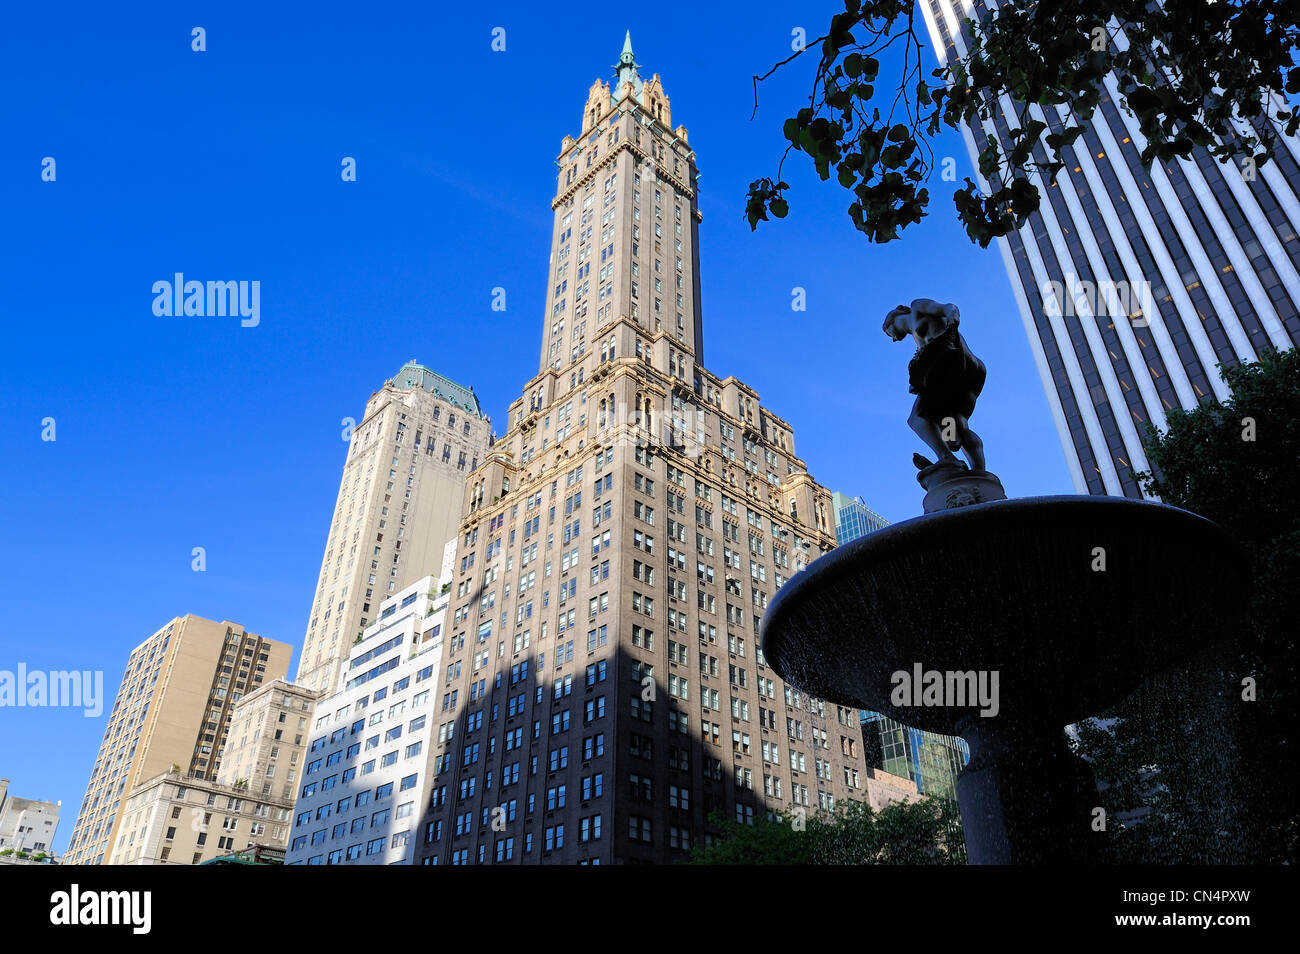 United States, New York, Manhattan, Midtown, 5th Avenue, Sherry Netherland Building and Pulizer fountain on Grand Army Plaza Stock Photo